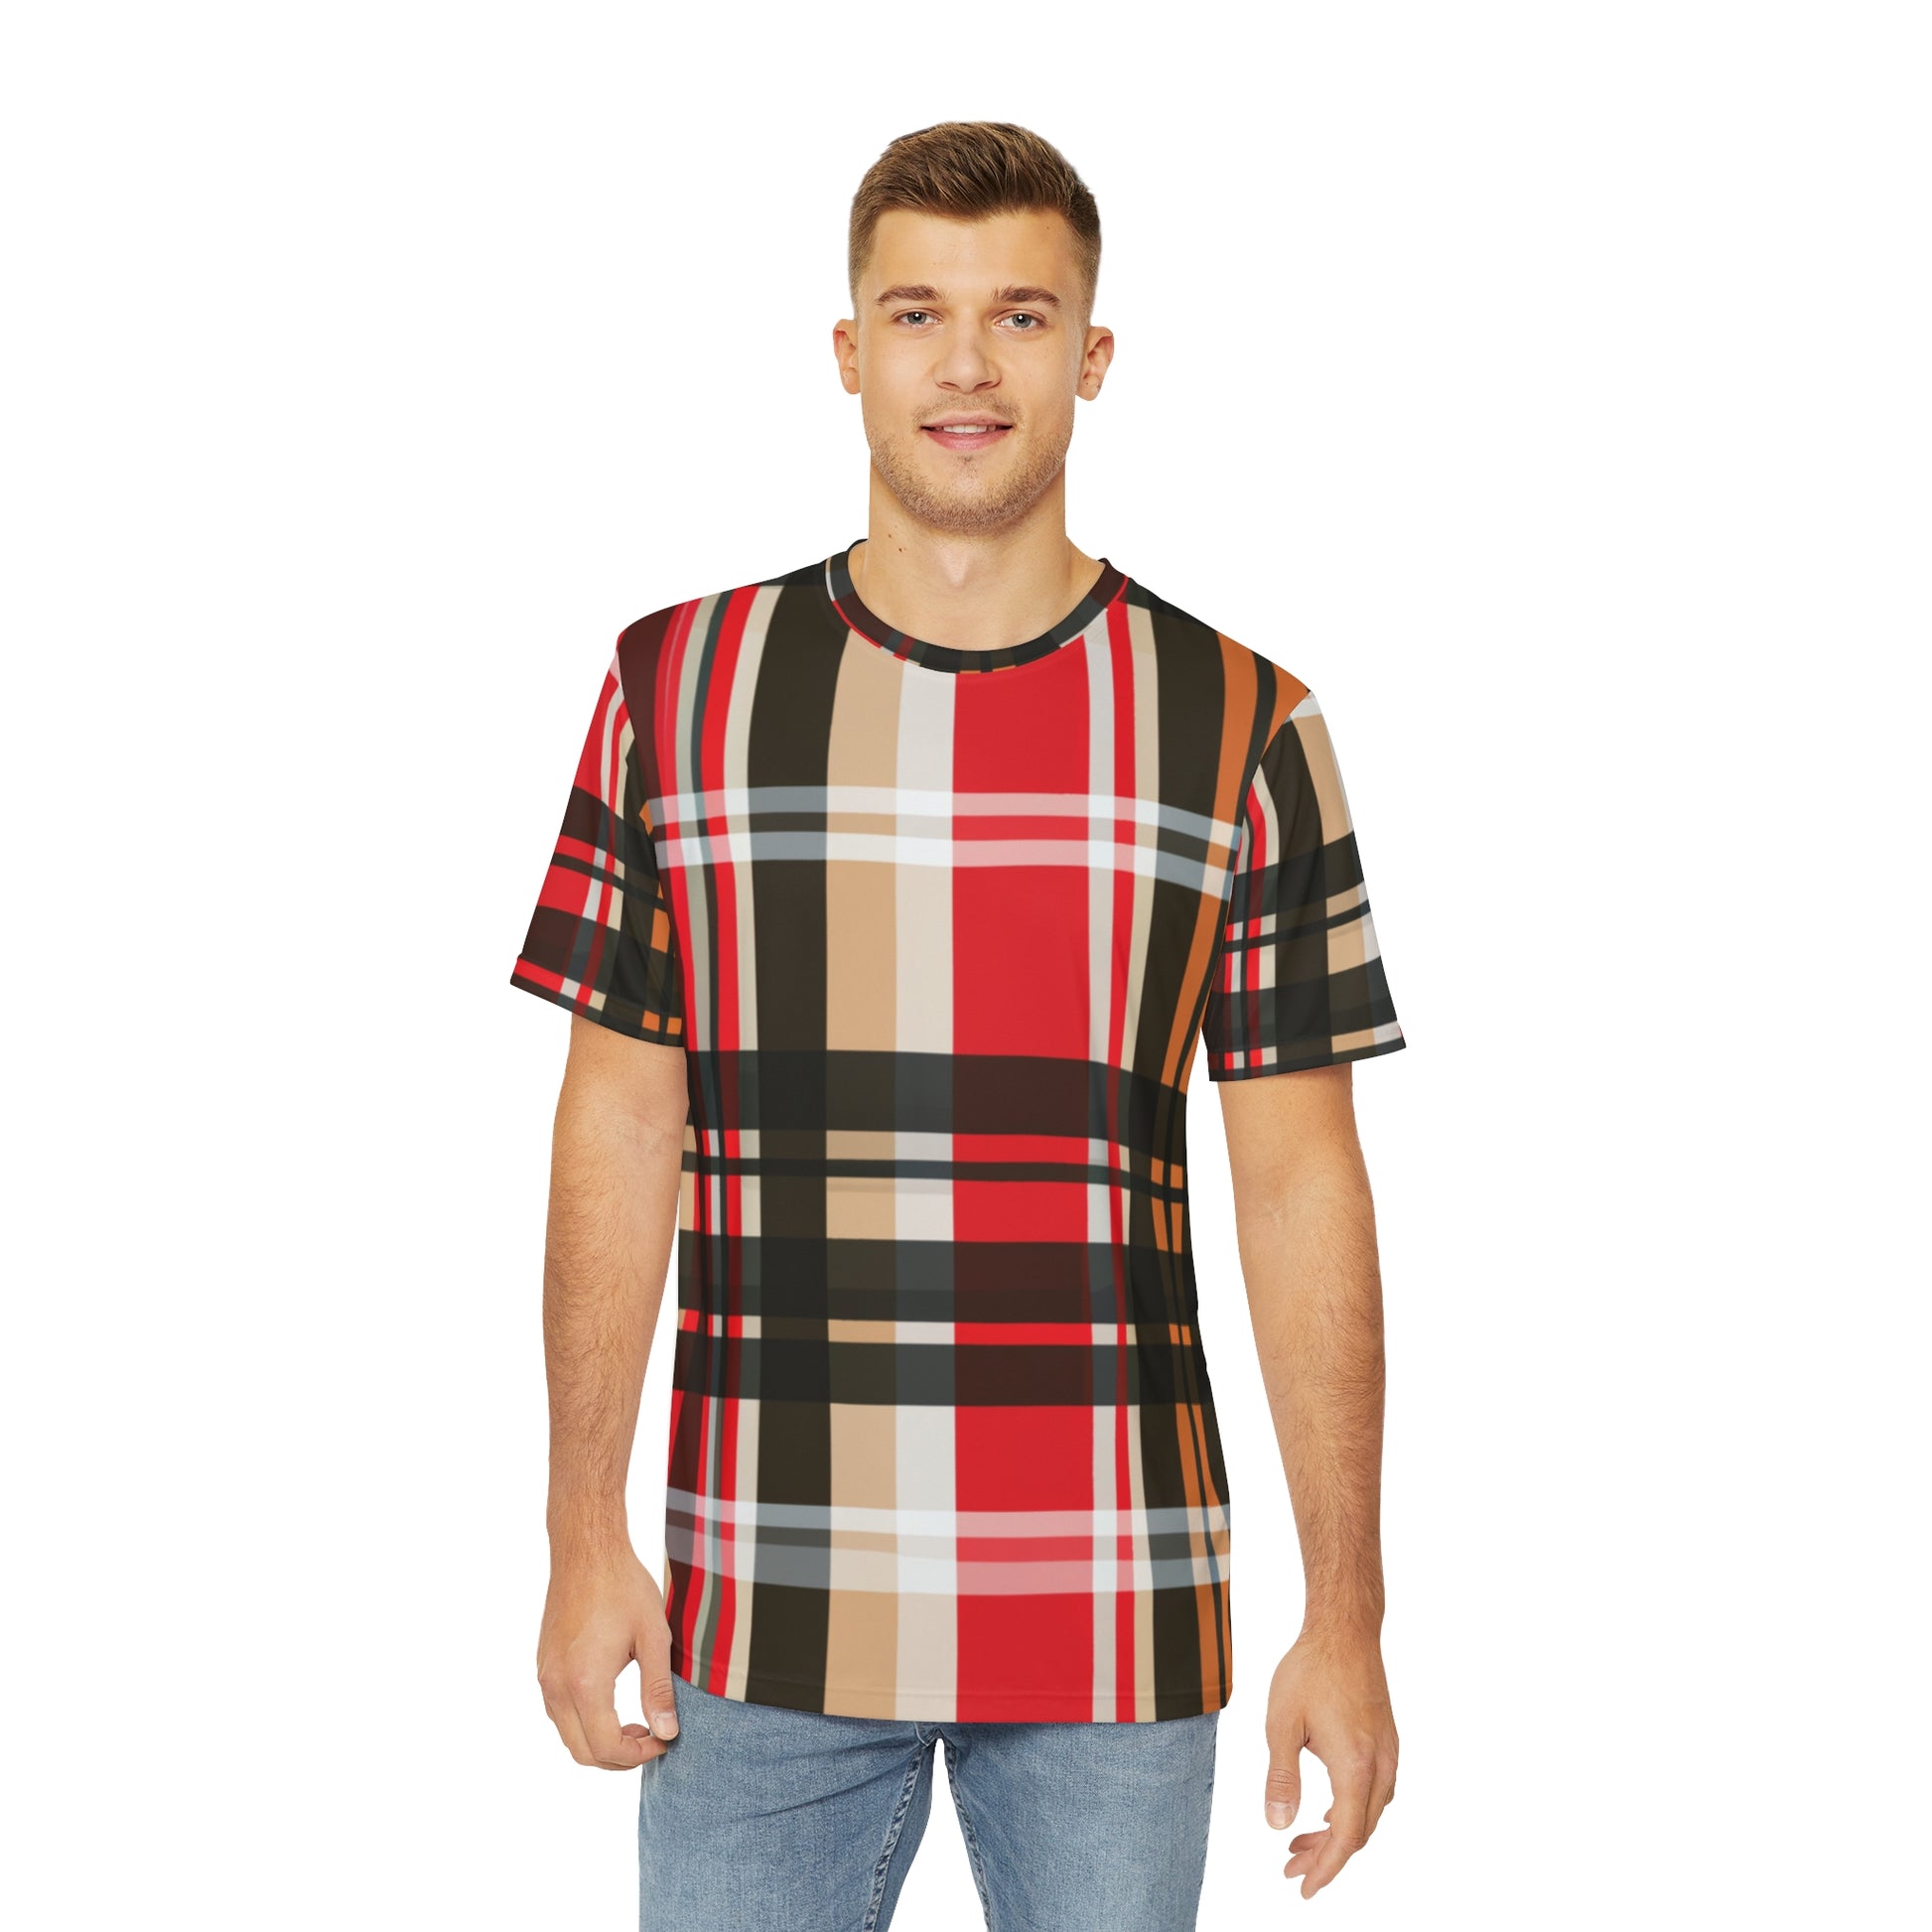 Front view of the Glasgow Plaid Crewneck Pullover All-Over Print Short-Sleeved Shirt red black white yellow mustard plaid pattern paired with casual denim jeans worn by a white male